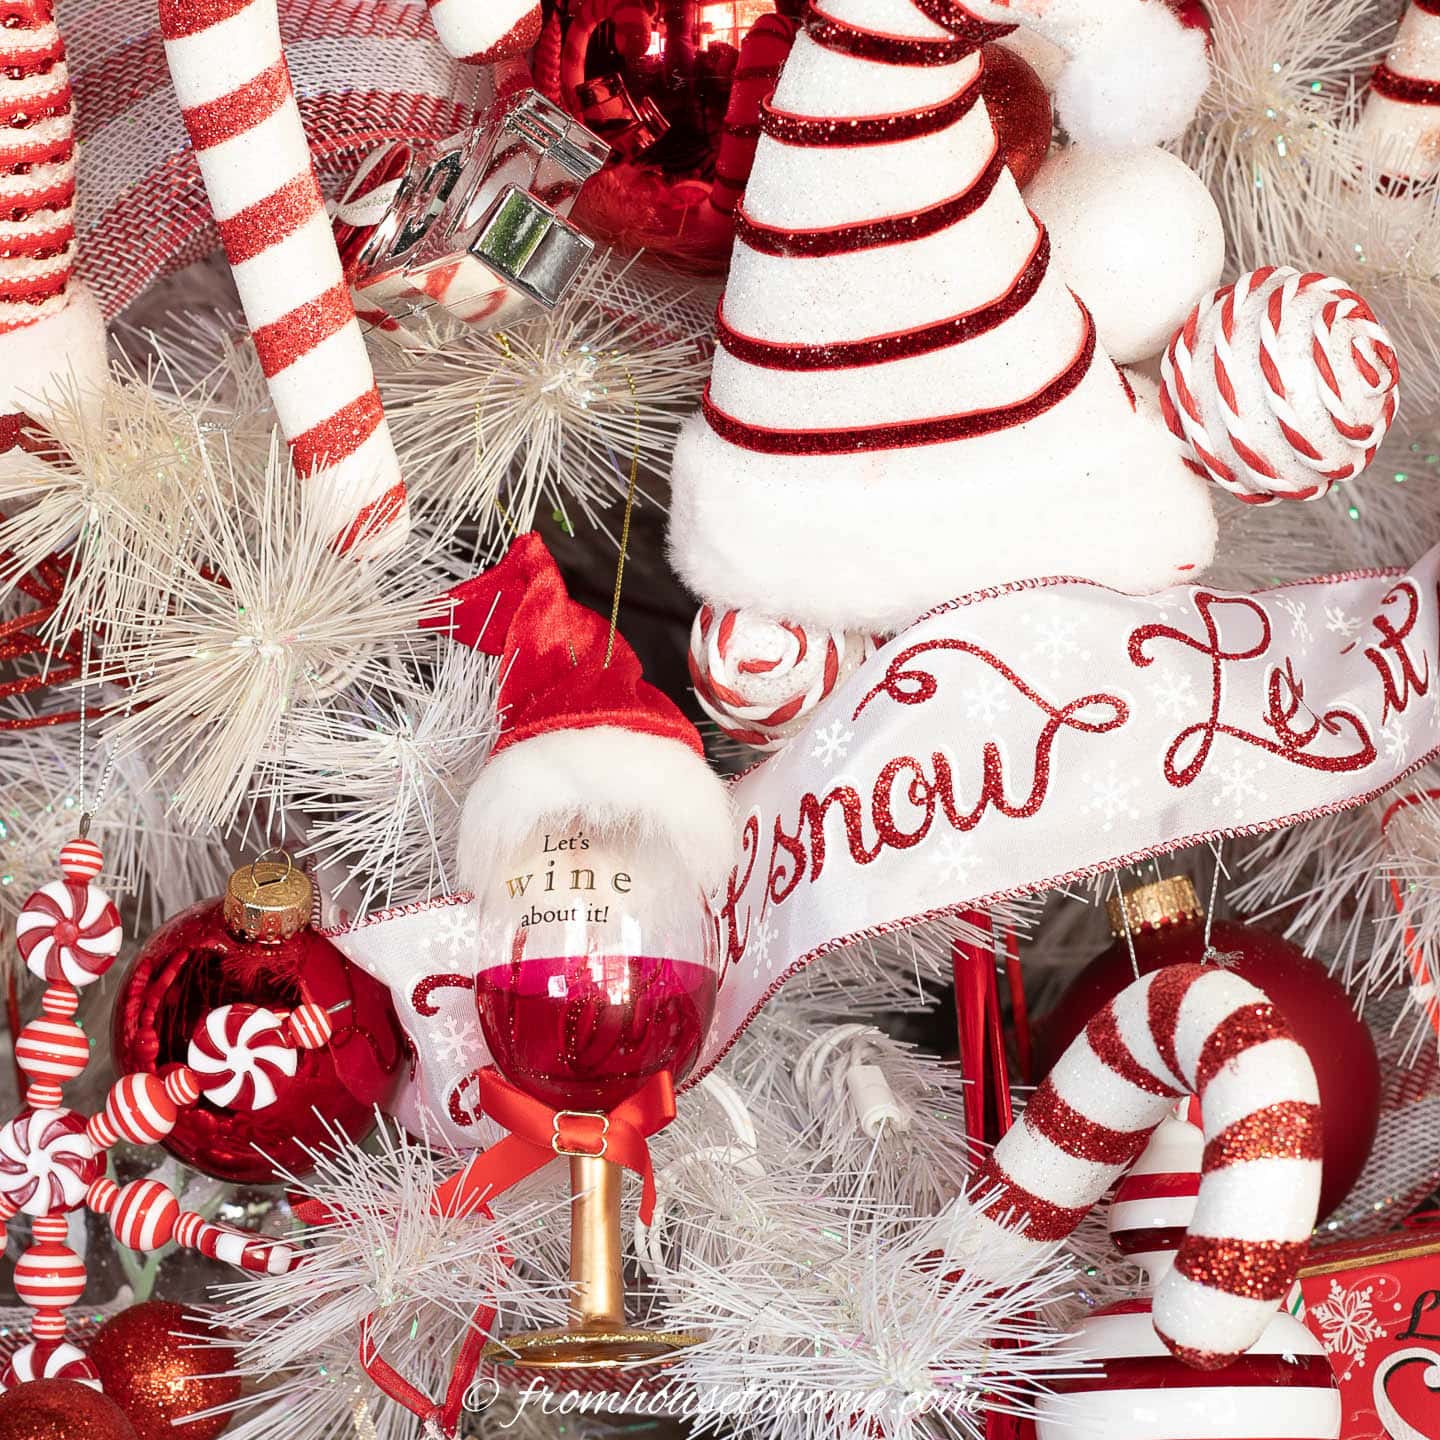 Santa wine glass , Santa hat and candy cane ornaments on a white Christmas tree wrapped with white and red ribbon